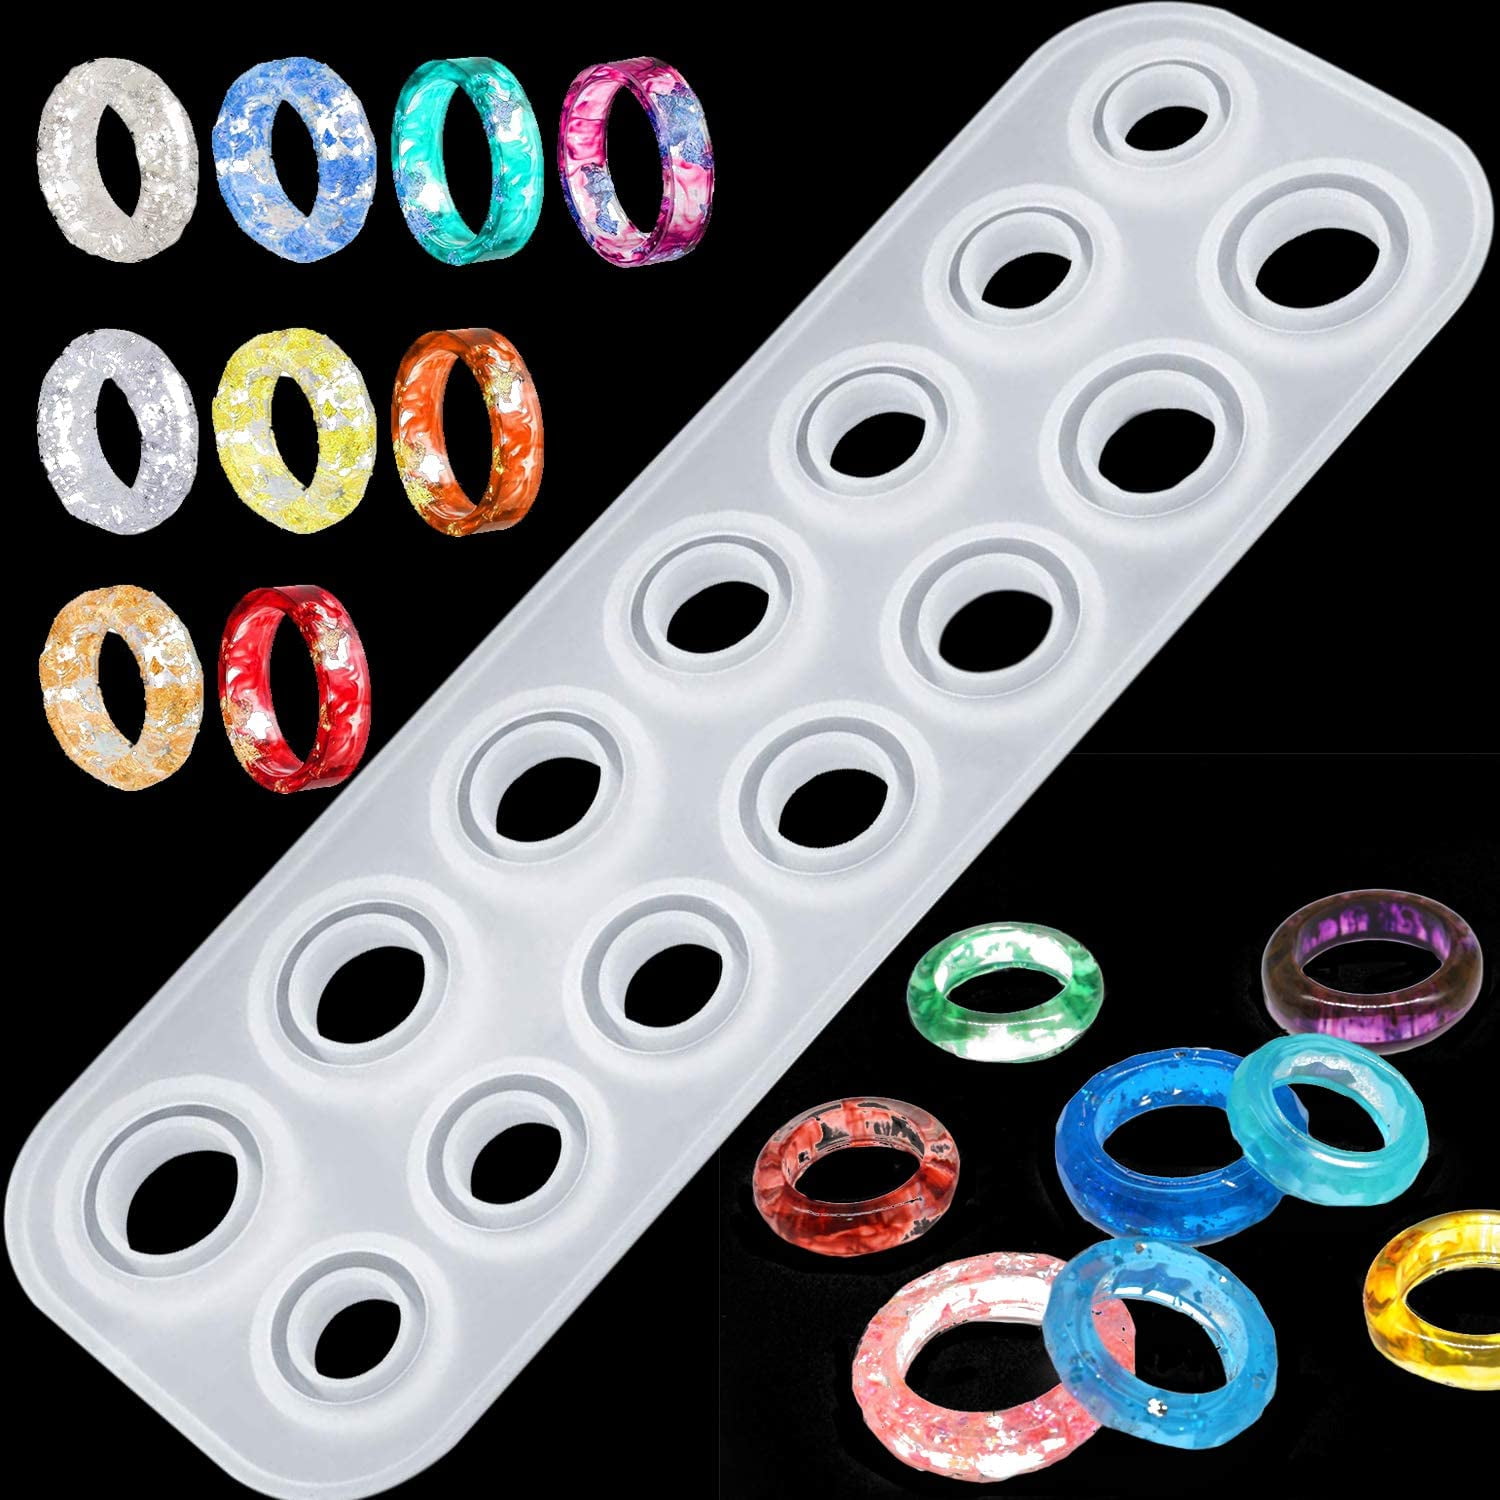 8 Pcs Silicone Ring Mold For Jewelry Making Resin Supplies DIY Ornament Mold 